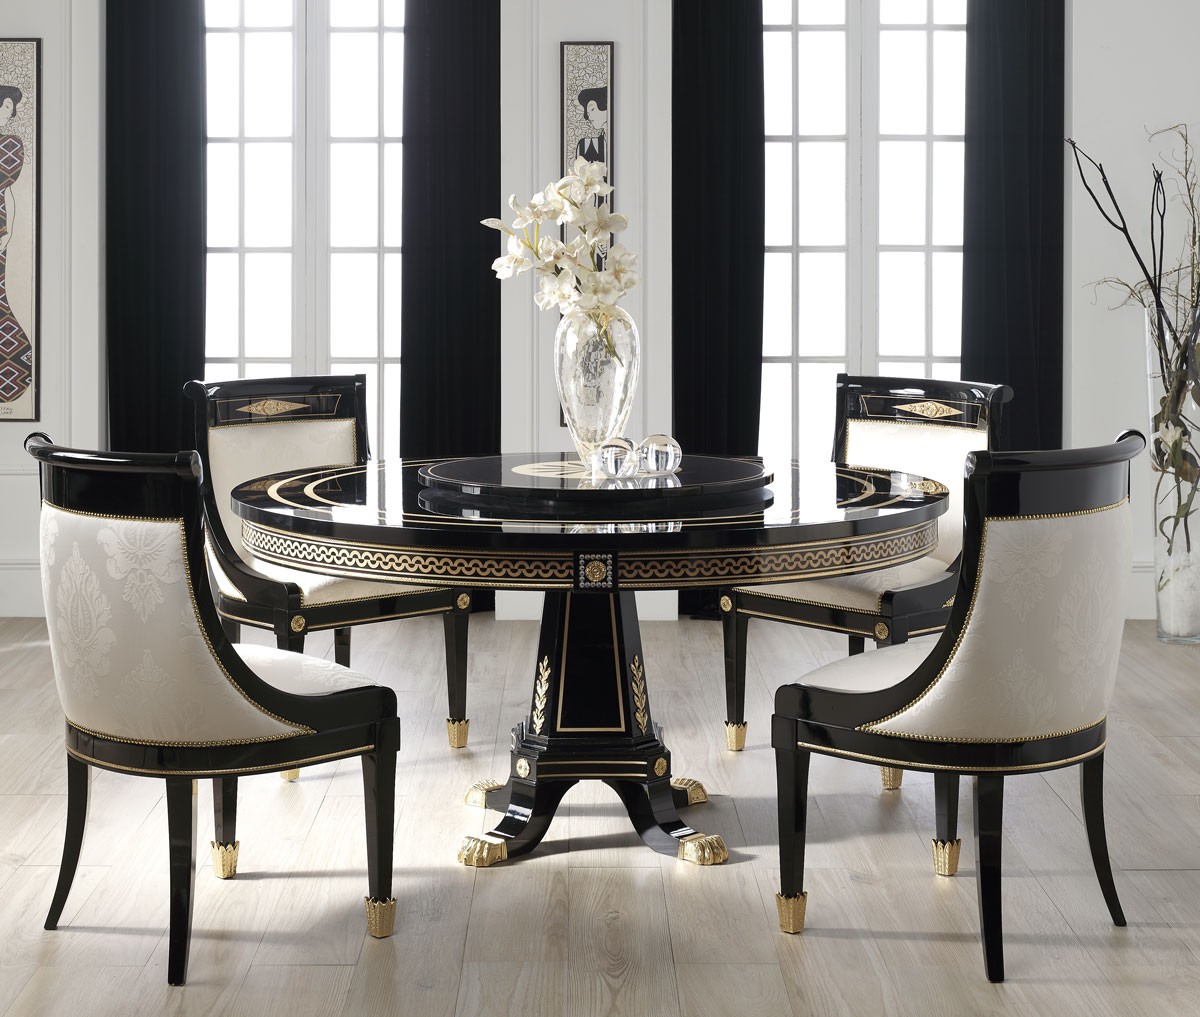 DINING ROOM FURNITURE BELARUS COLLECTION. DINING TABLE B